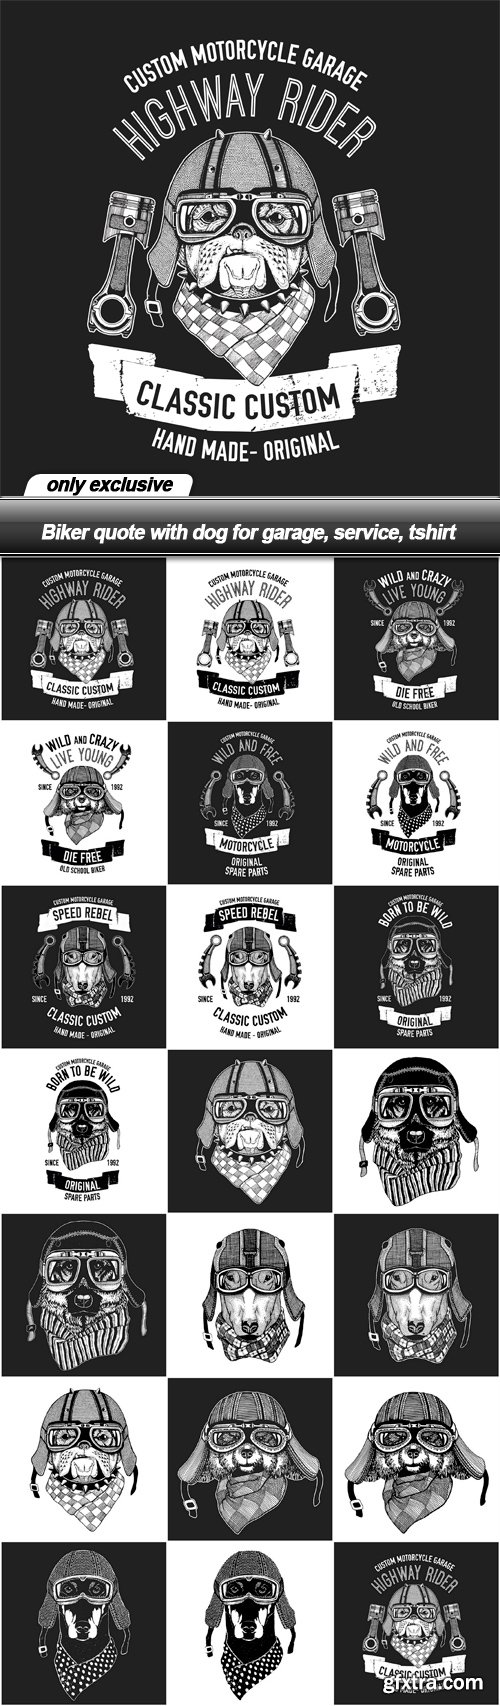 Biker quote with dog for garage, service, tshirt - 20 EPS